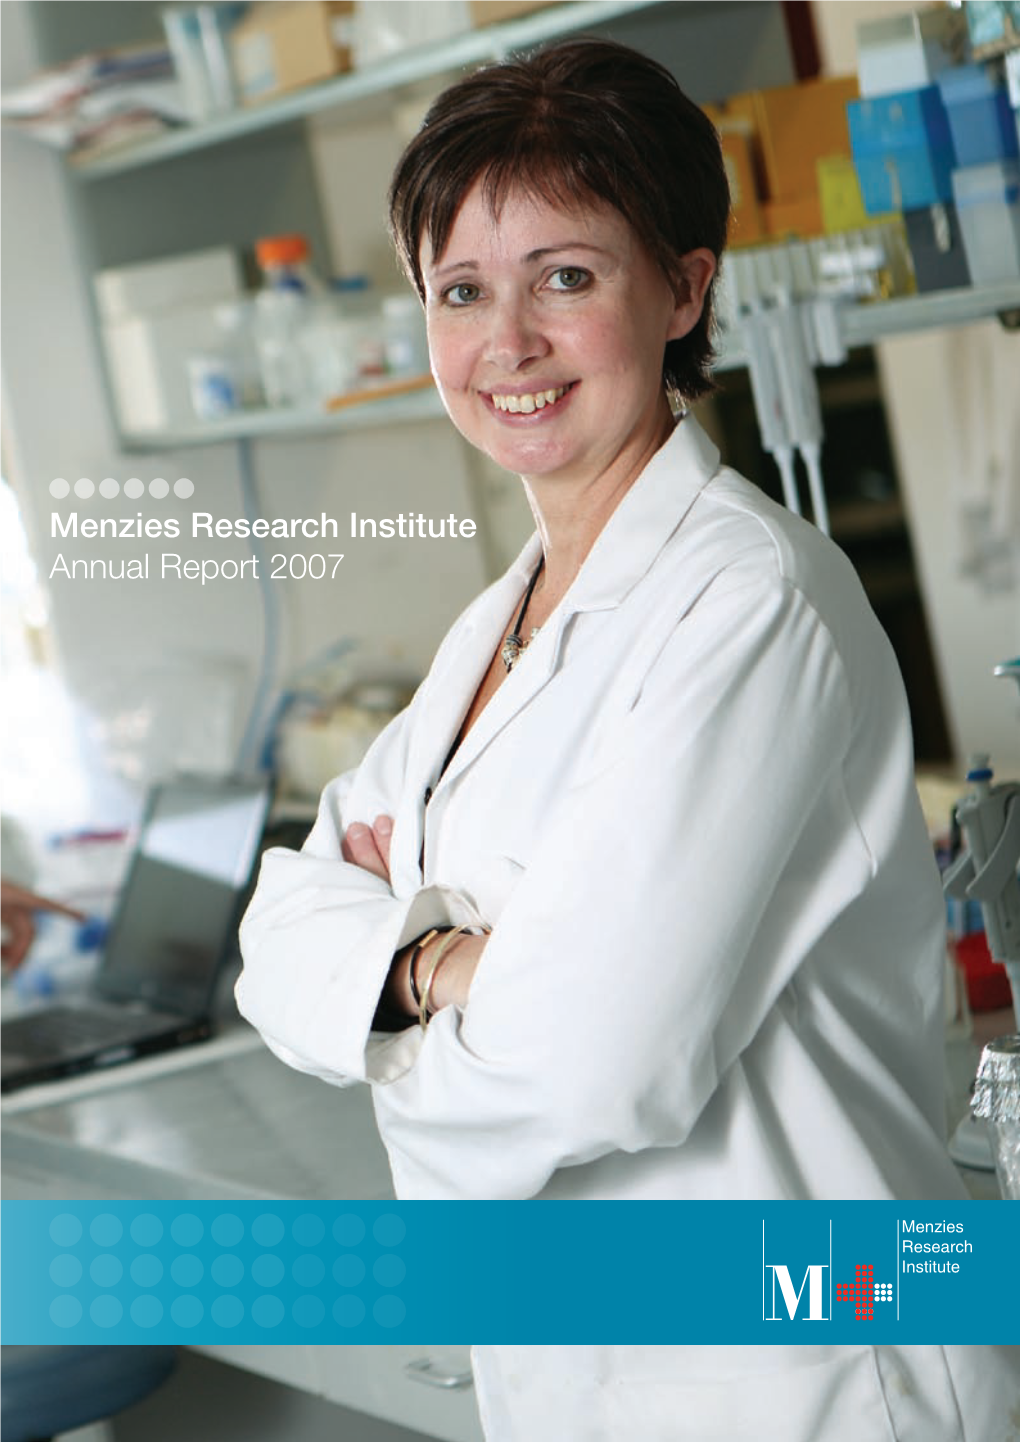 Menzies Research Institute Annual Report 2007 About Us